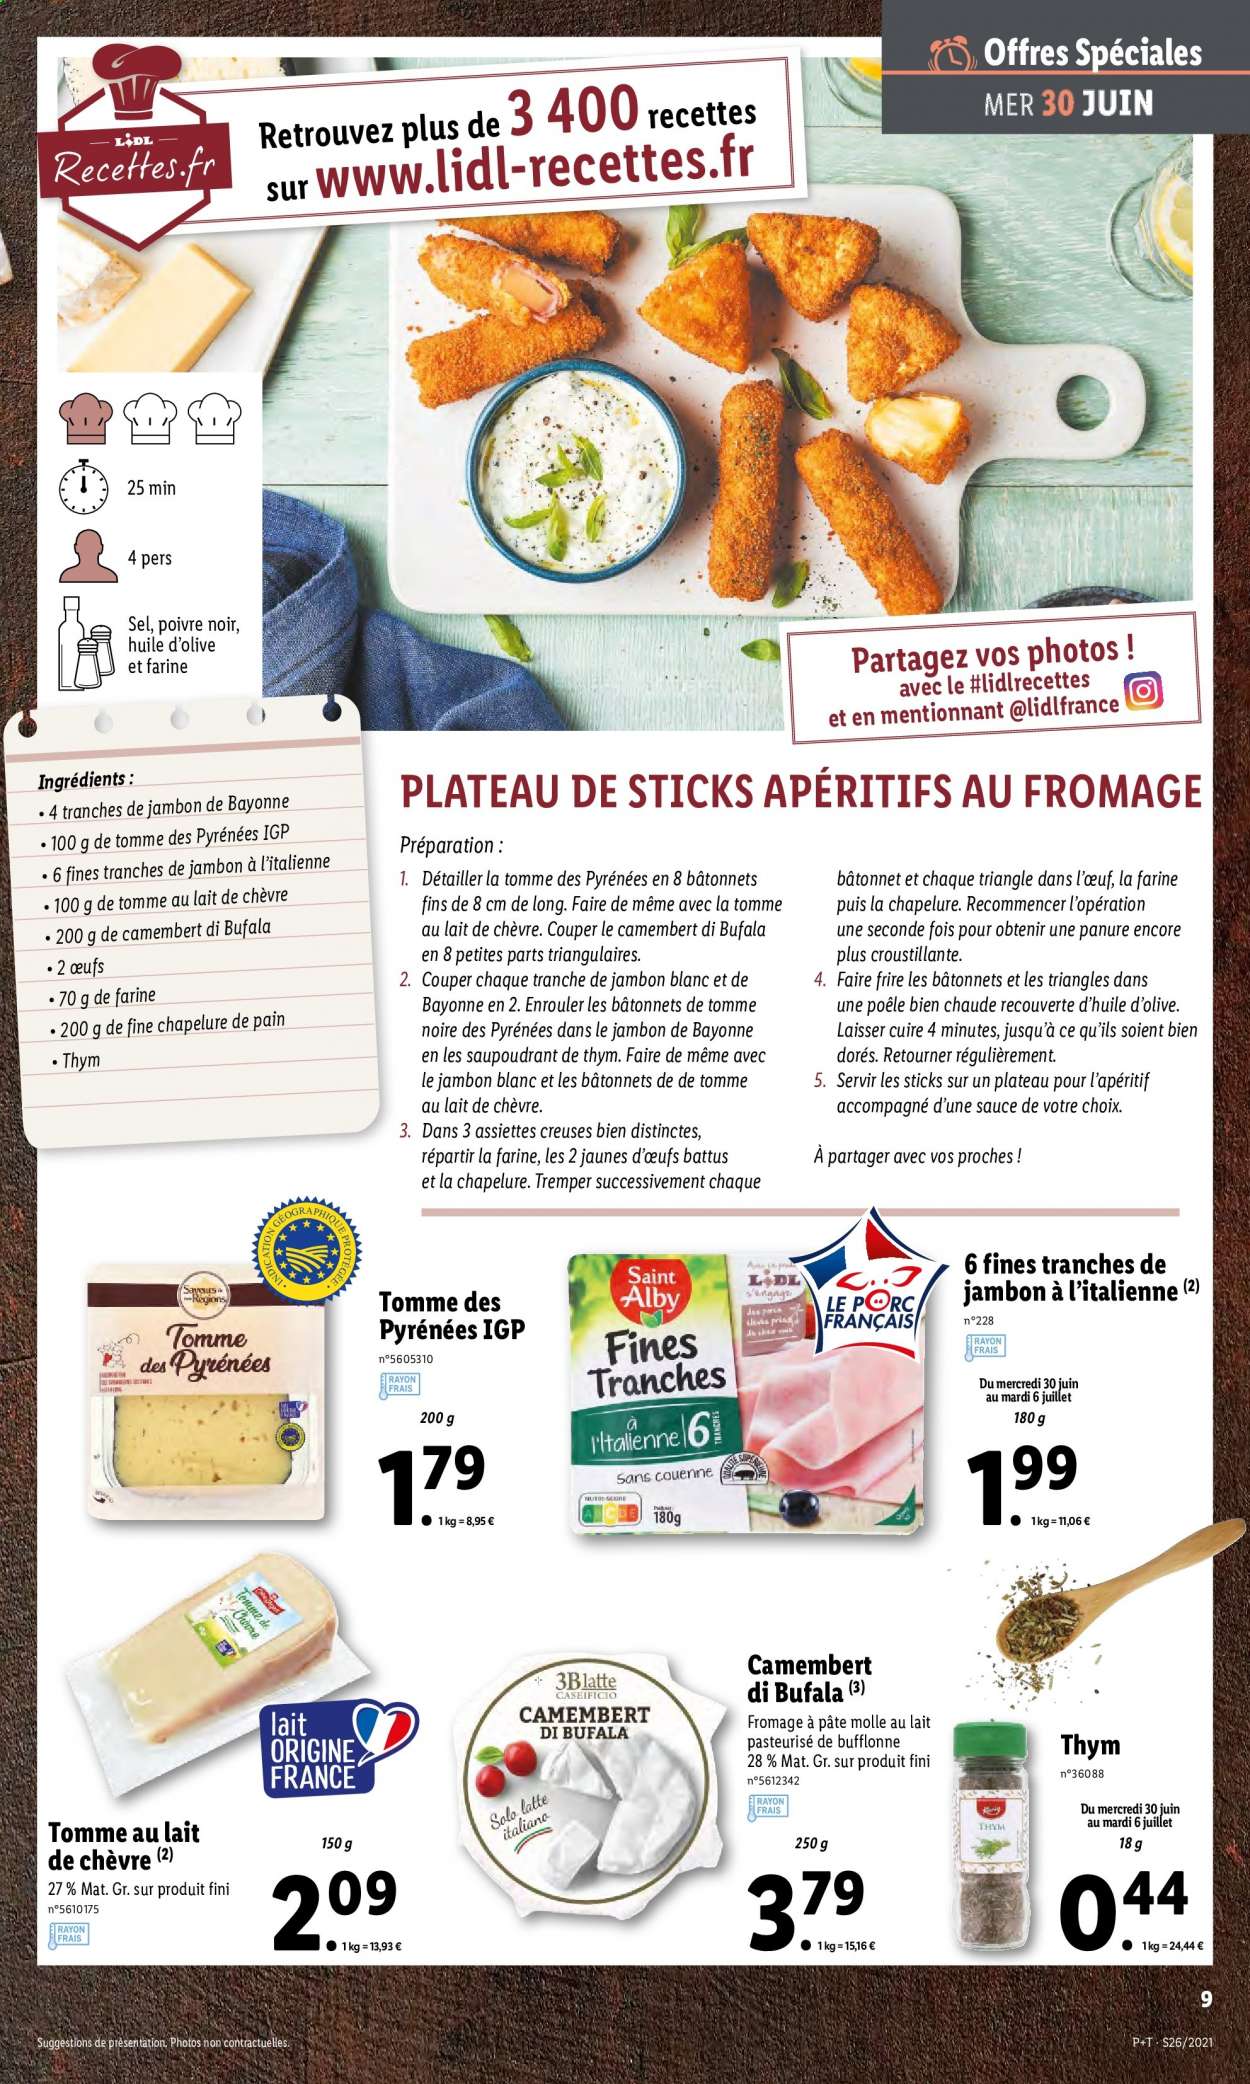 Catalogue Lidl - 30.06.2021 - 06.07.2021. Page 11.